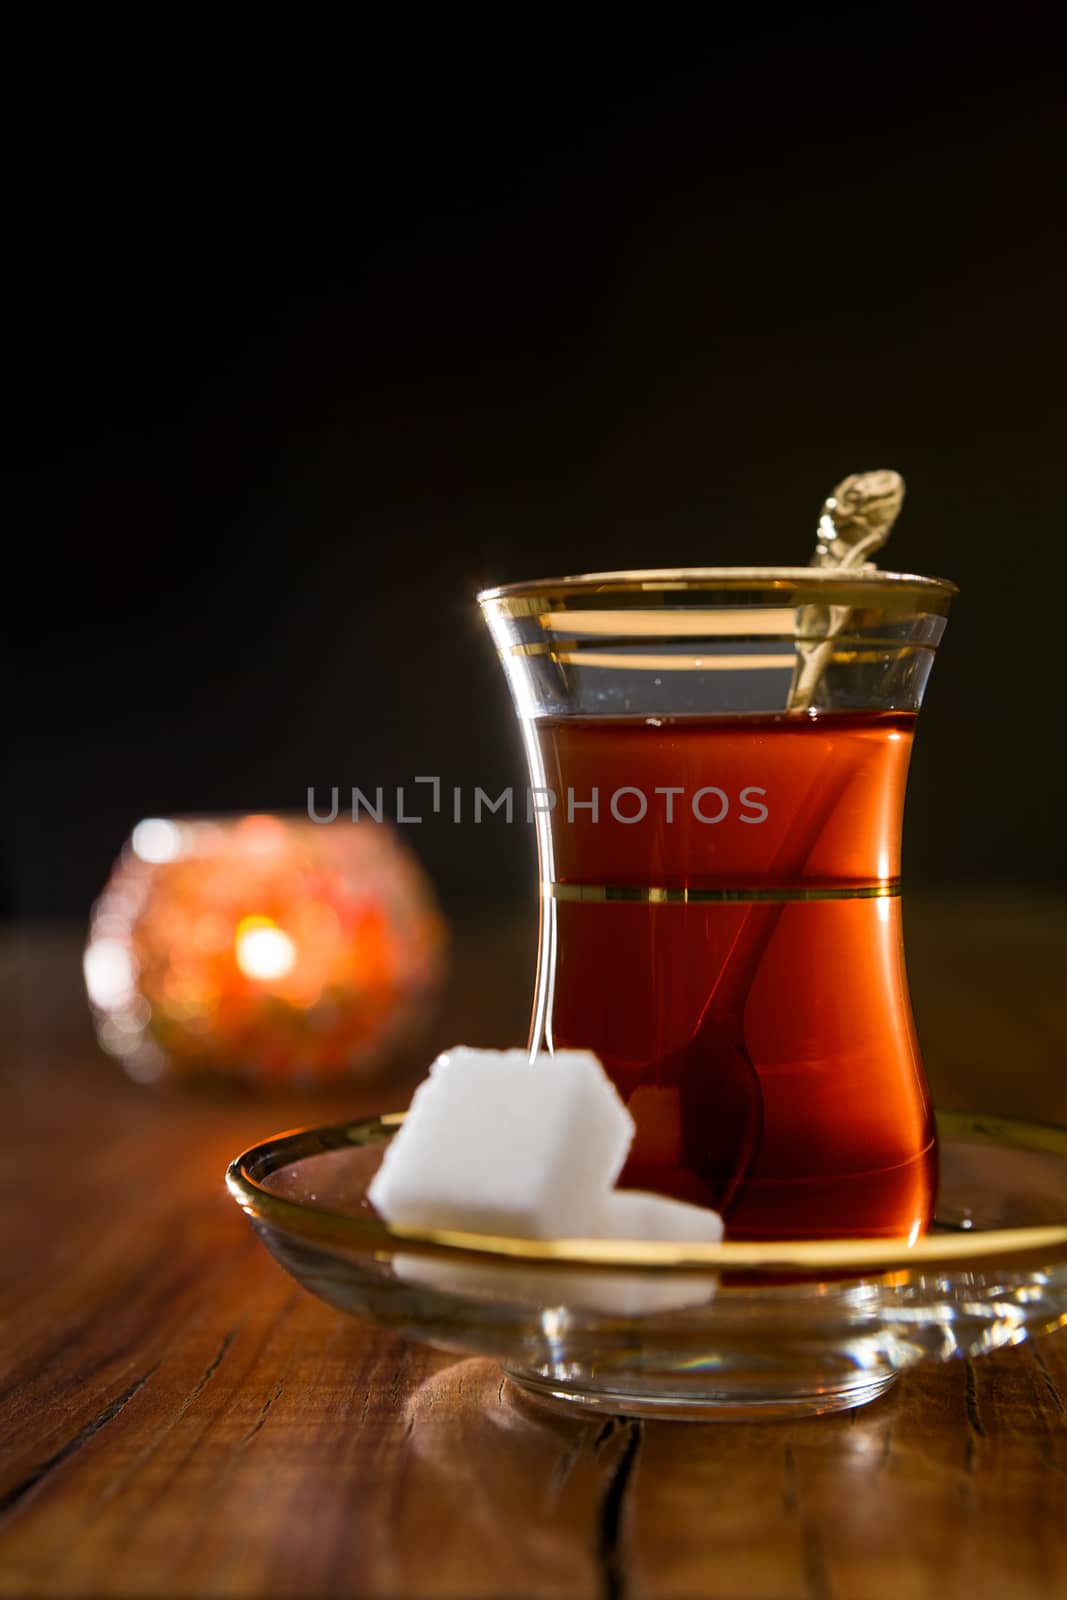 Turkish tea in traditional glass over a wooden background in backlight